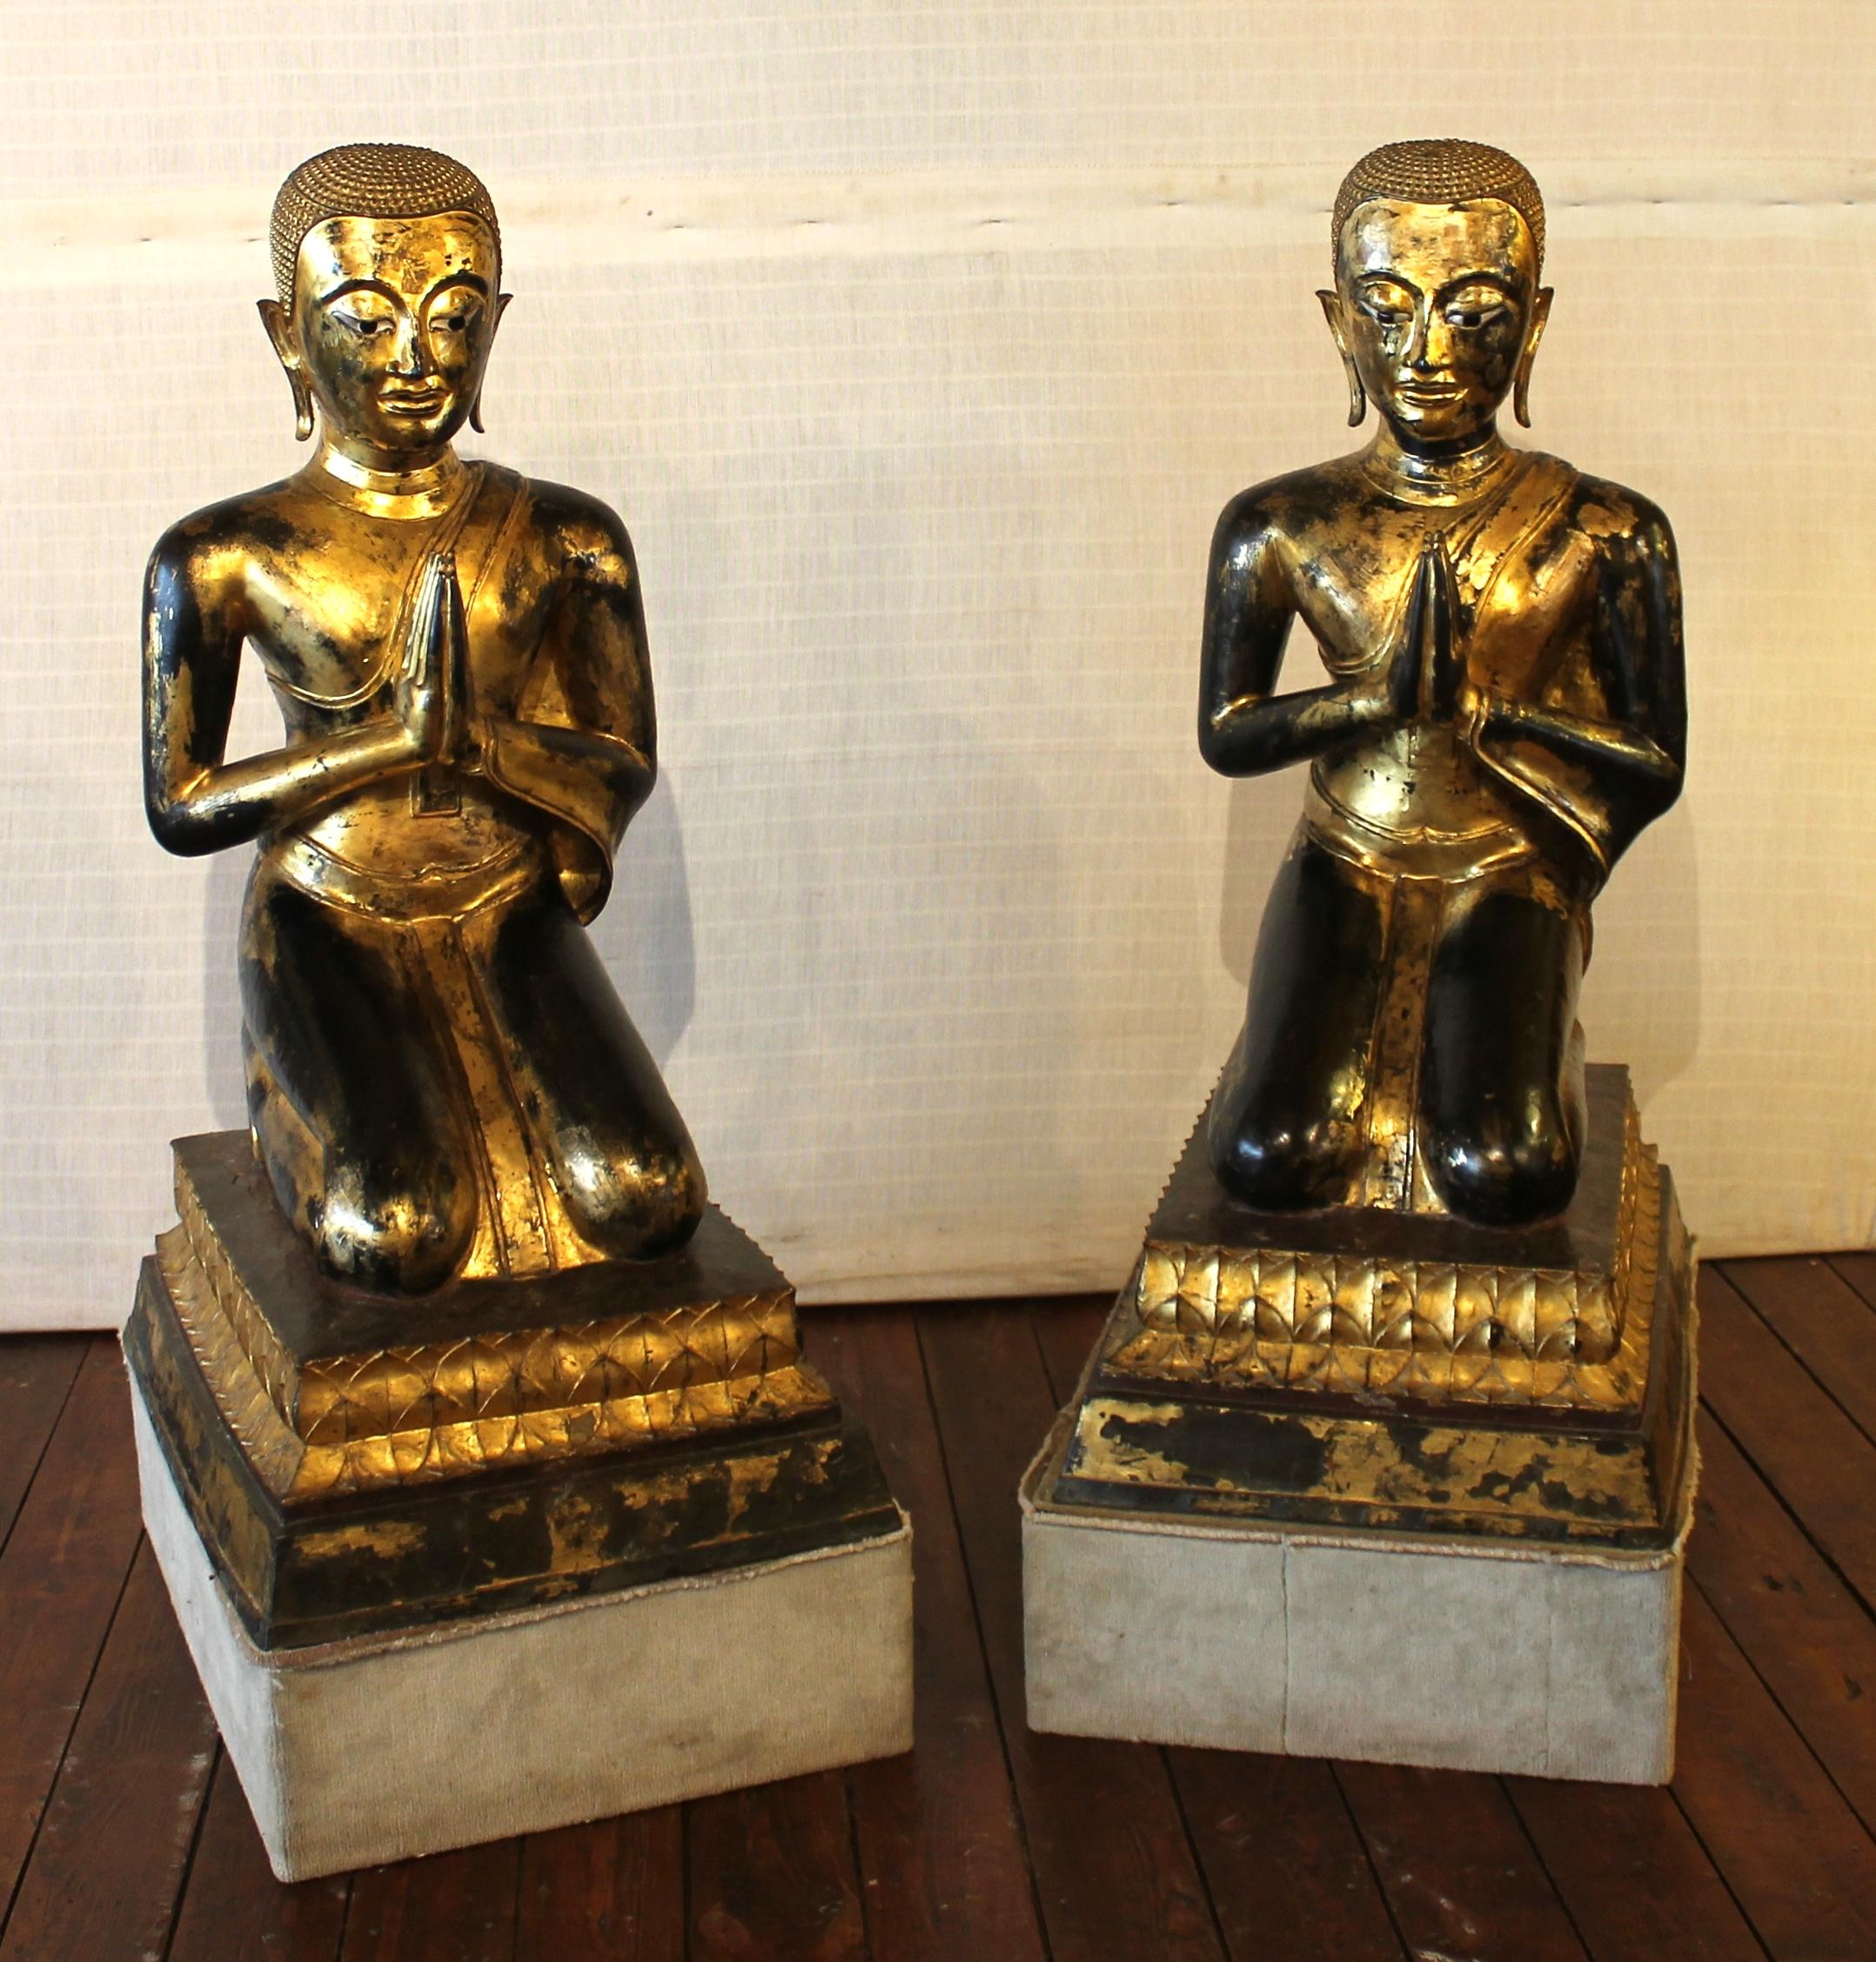 Rare pair of monks from the 18th century-Ayutthaya-Thailand
Superb pair of large lacquered and gilt bronze monks
very beautiful face and expression and extremely rare to find
The monks are in superb condition and do not require any